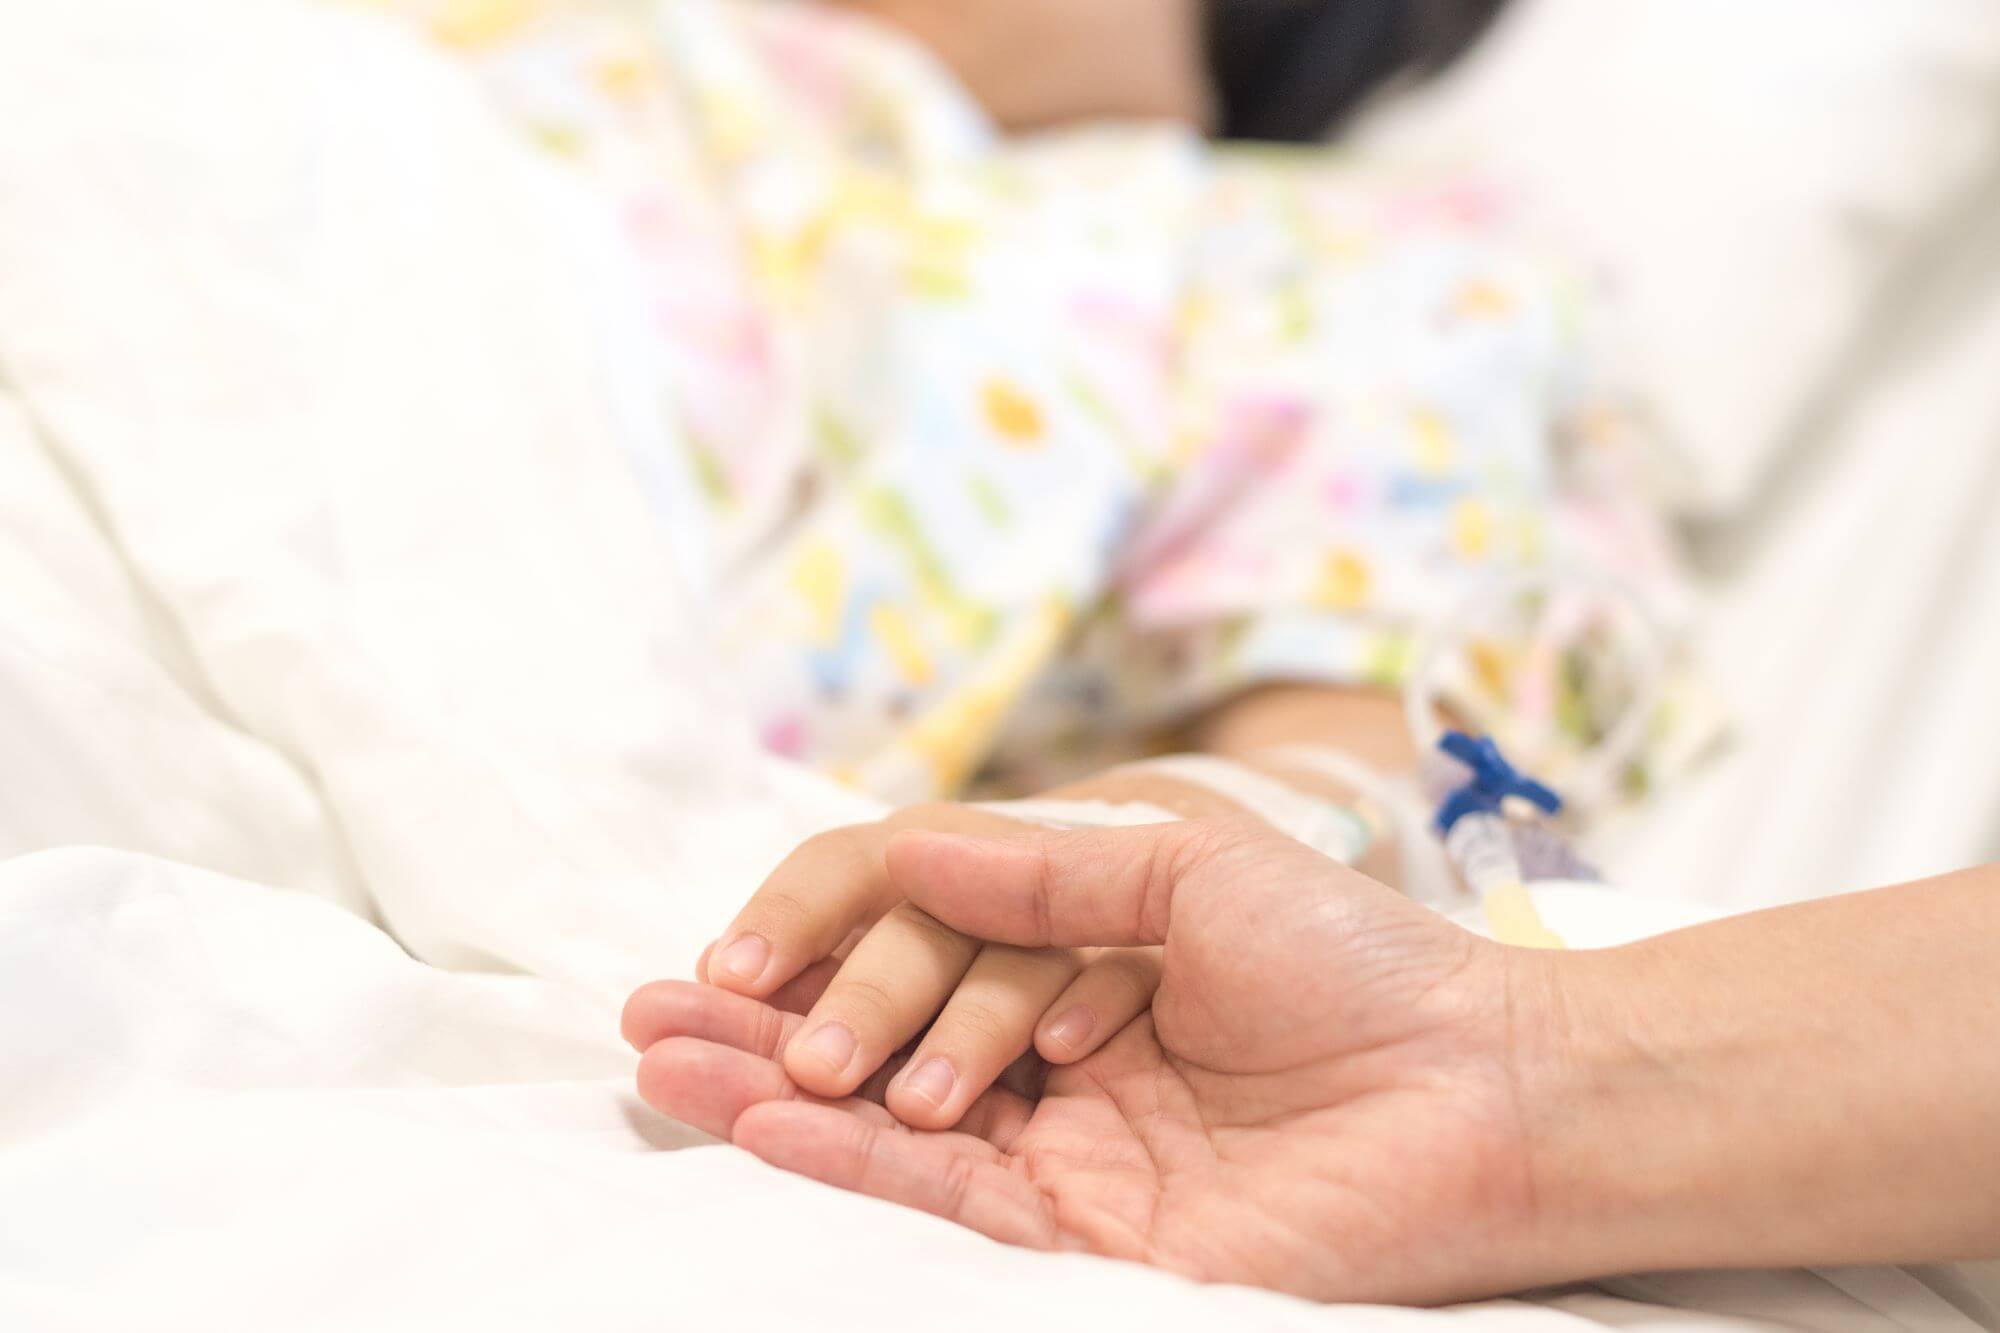 Holding hands with woman in hospital bed